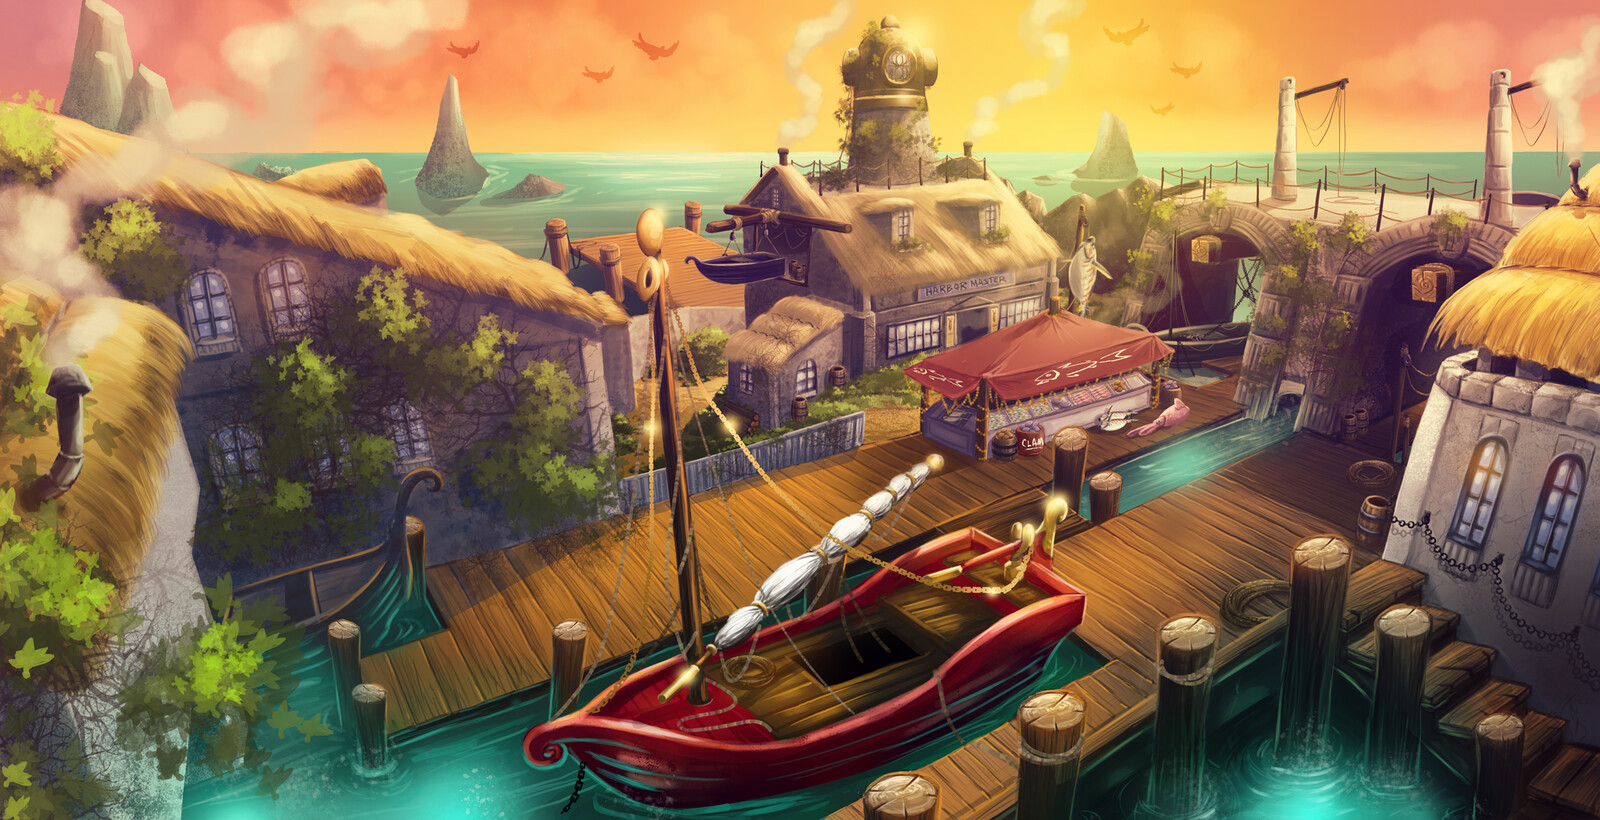 I painted and designed this in photoshop. I had a lot of fun with the little fish market. 